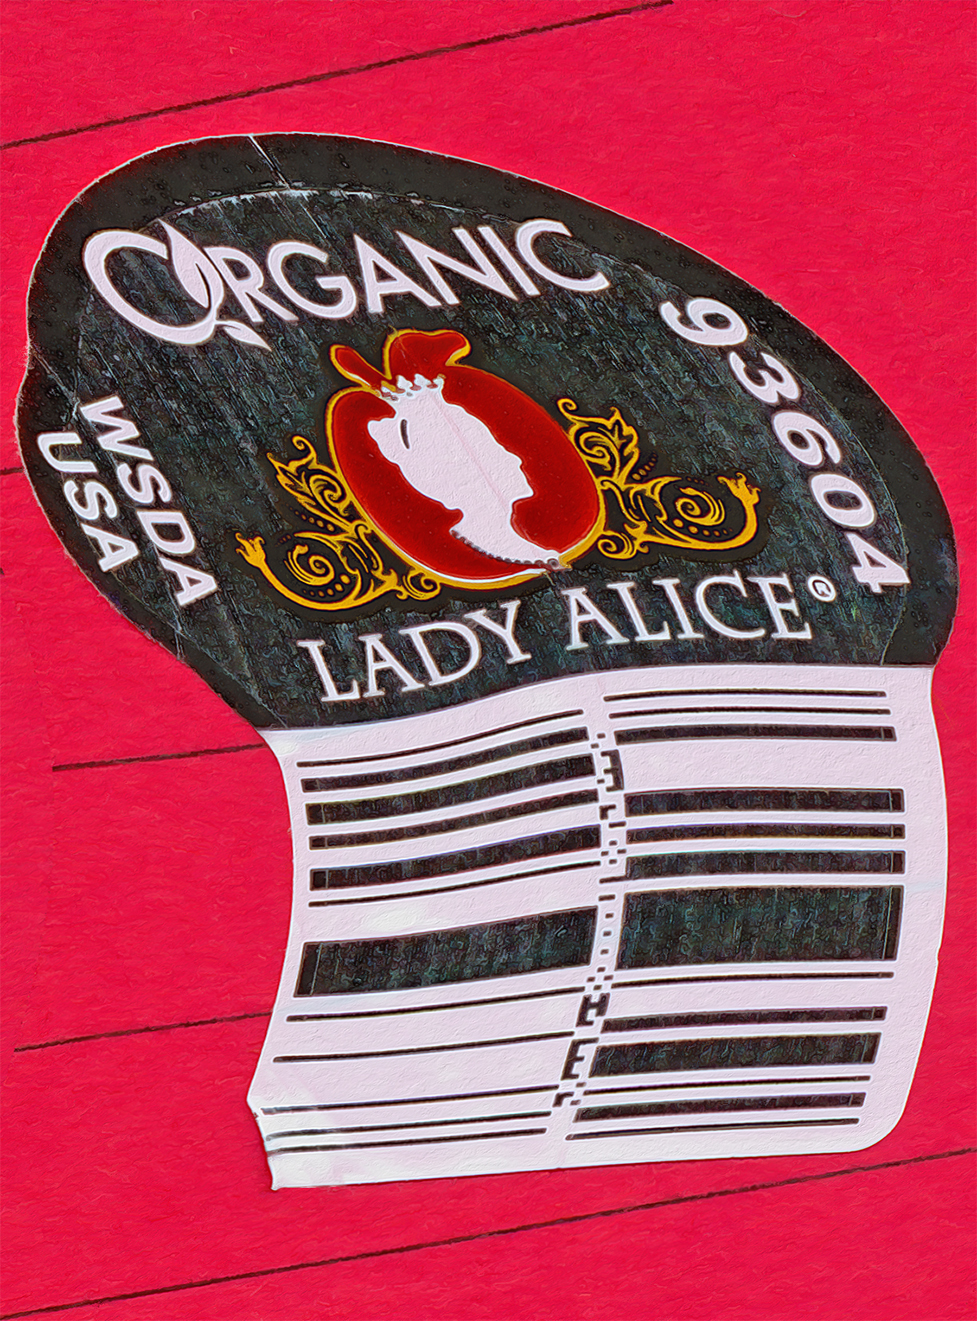 Lady Alice apple from Whole Foods on 6 April 2022